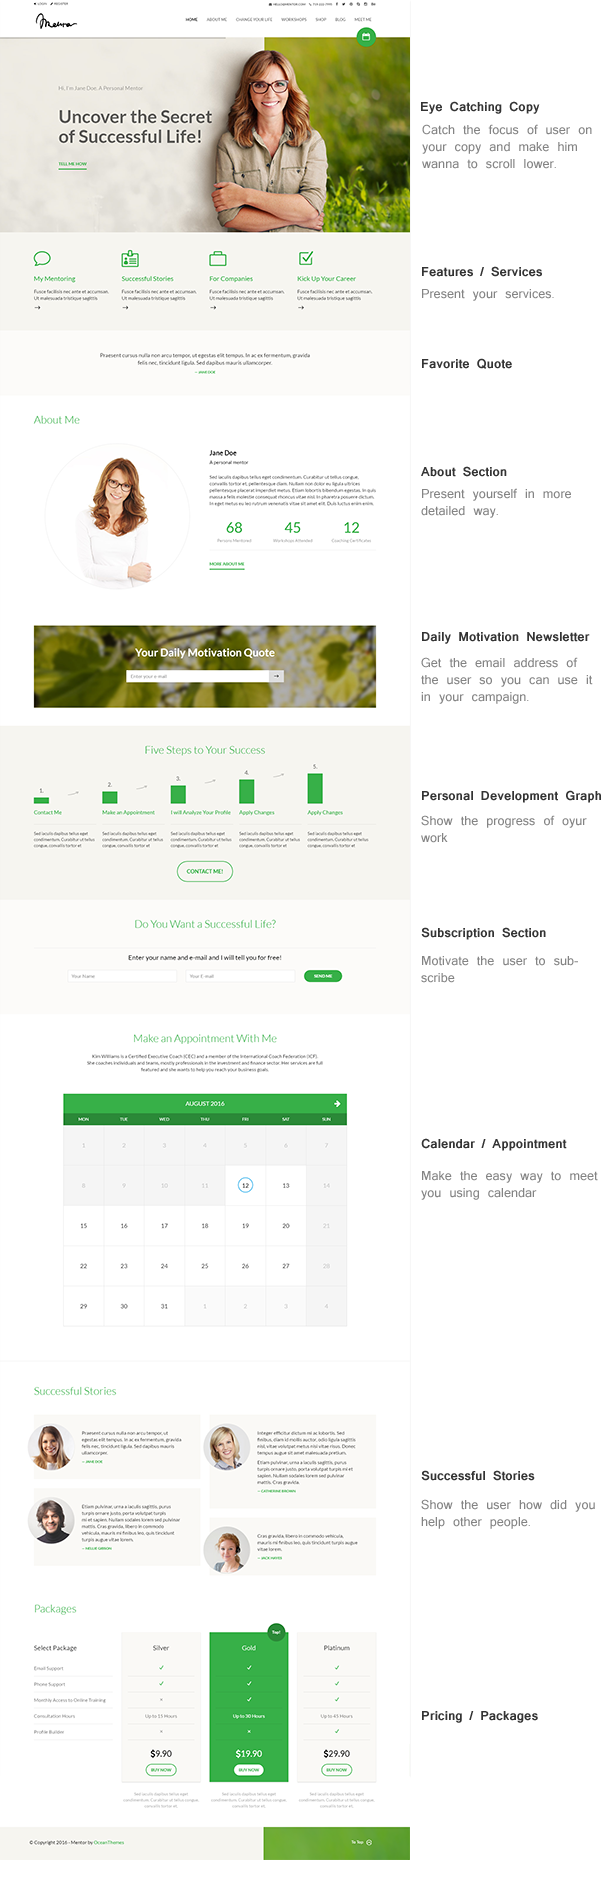 Mentor - Personal Development Coach WordPress Theme for made coaches, trainers, therapist or another profession